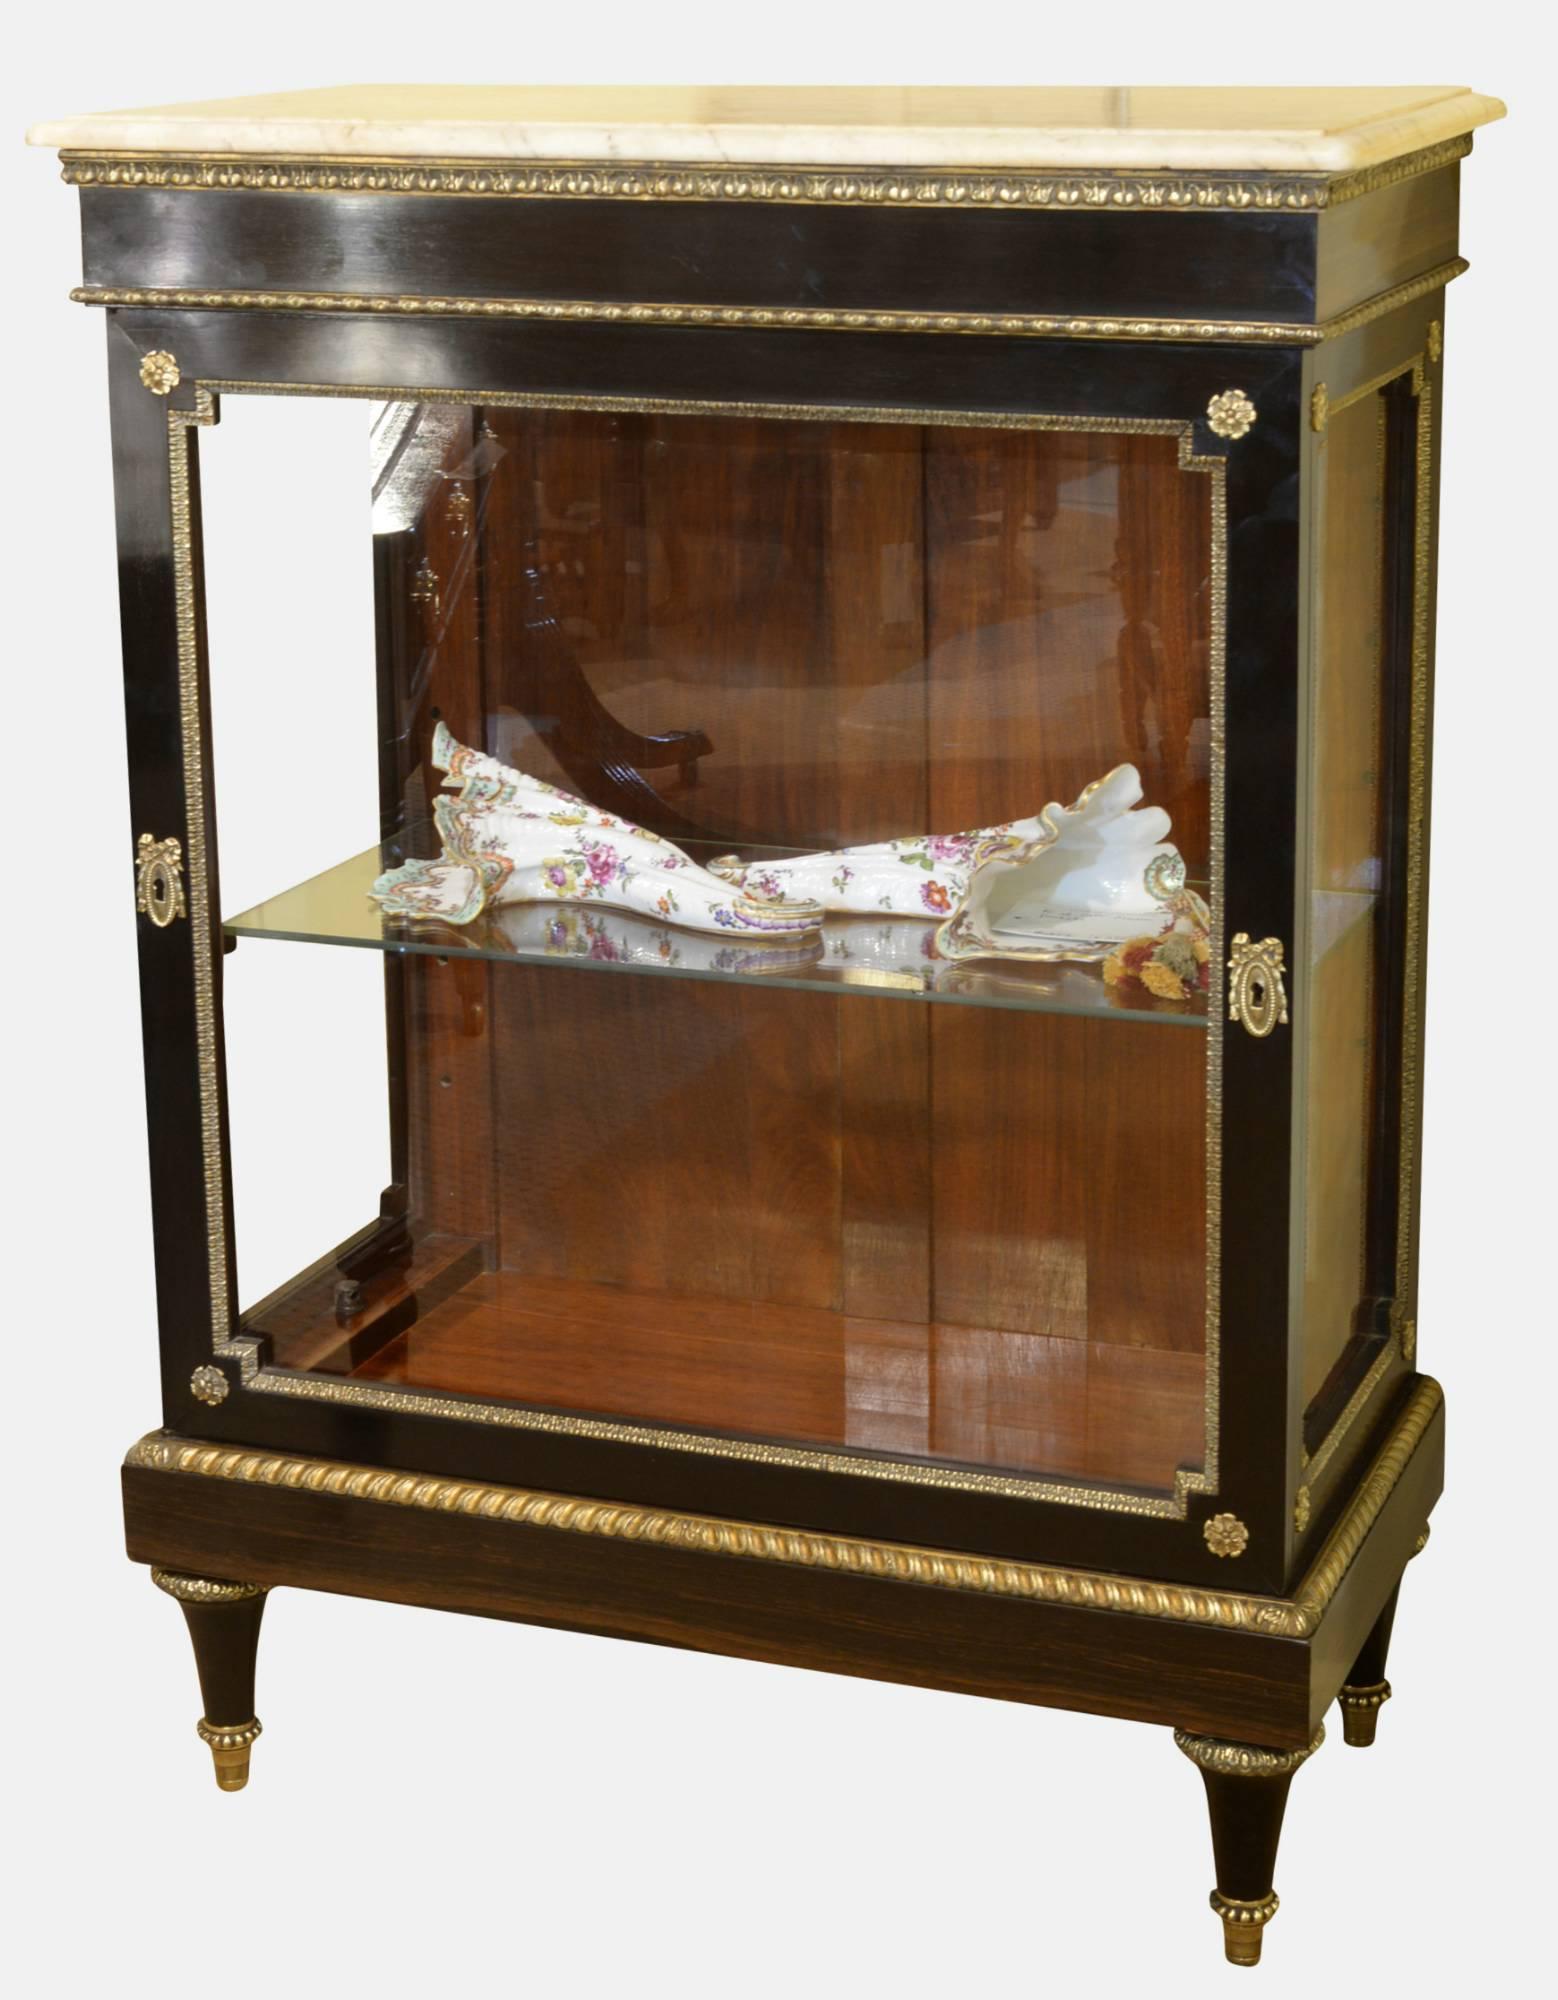 19th century French display cabinet in coromandel and polished mahogany interior and brass mounts. Original marble top, 

circa 1860.